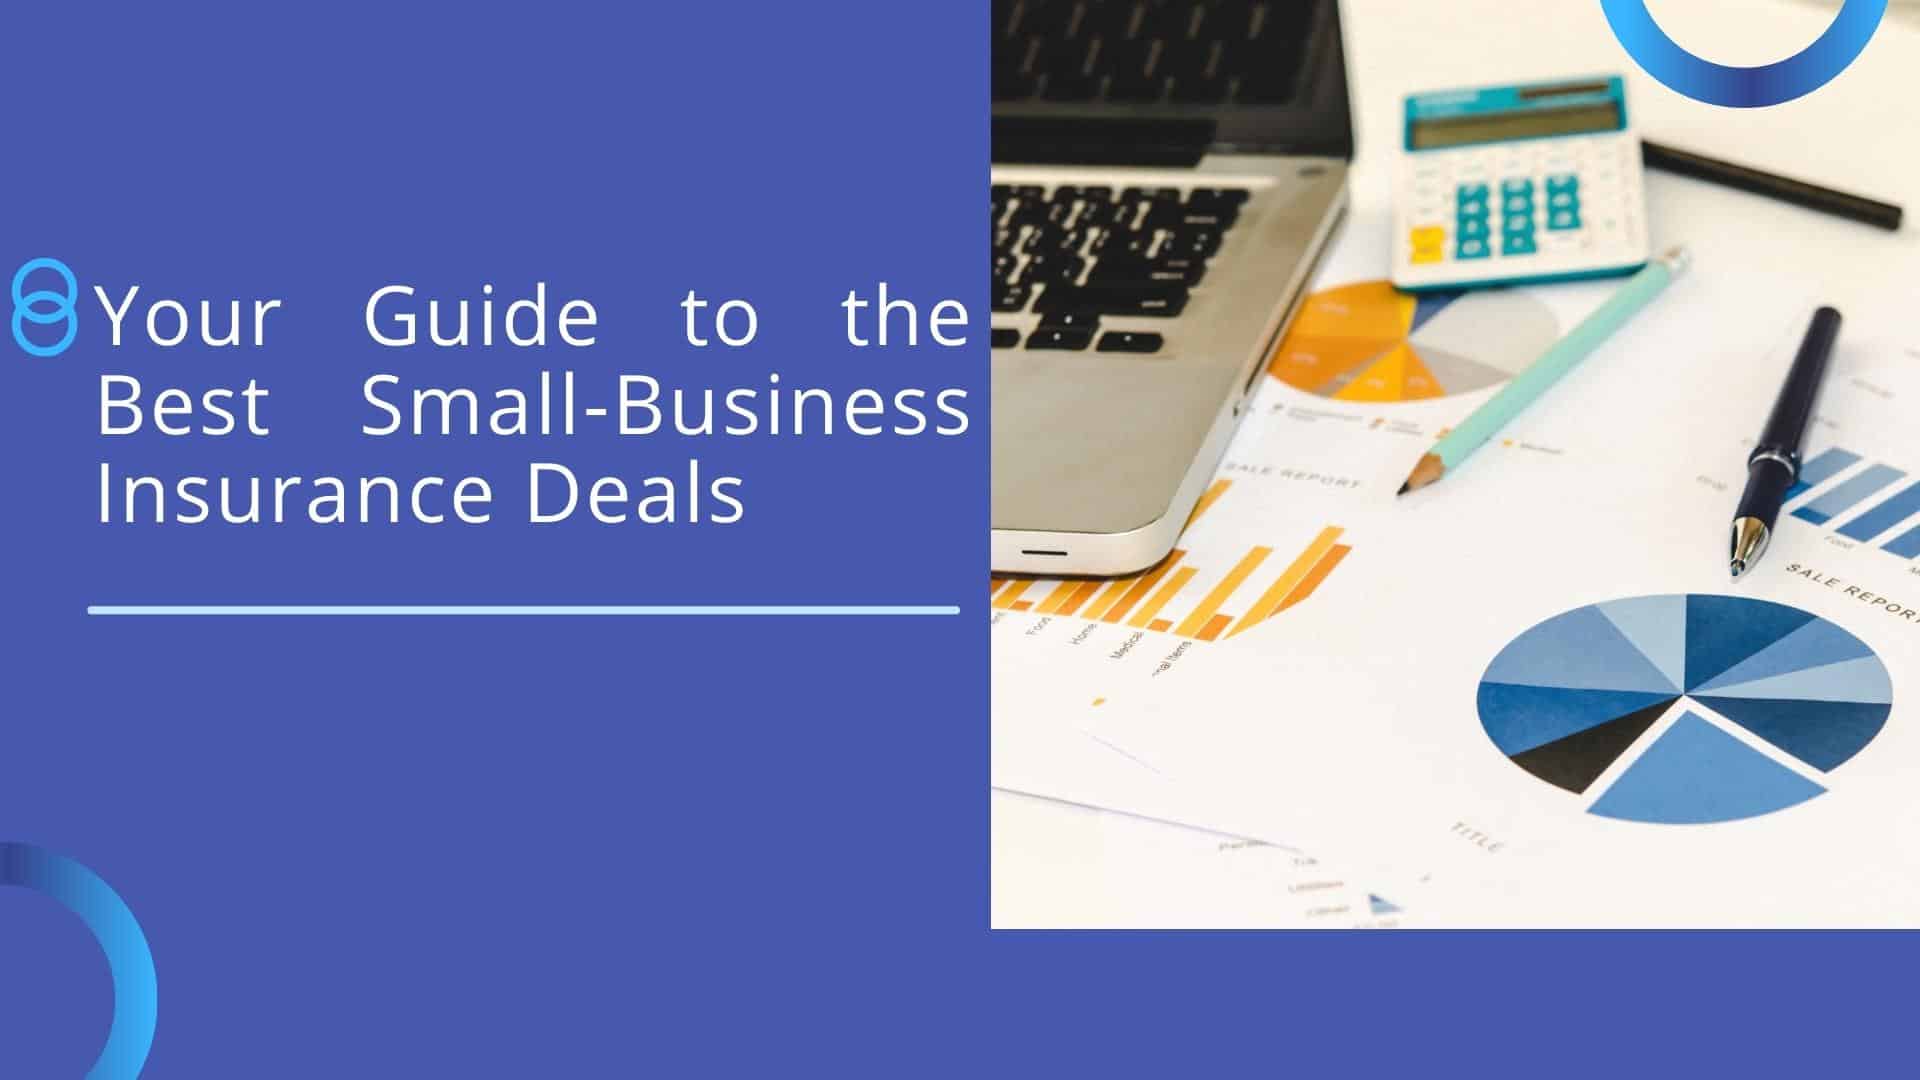 Your Guide to the Best Small Business Insurance Deals